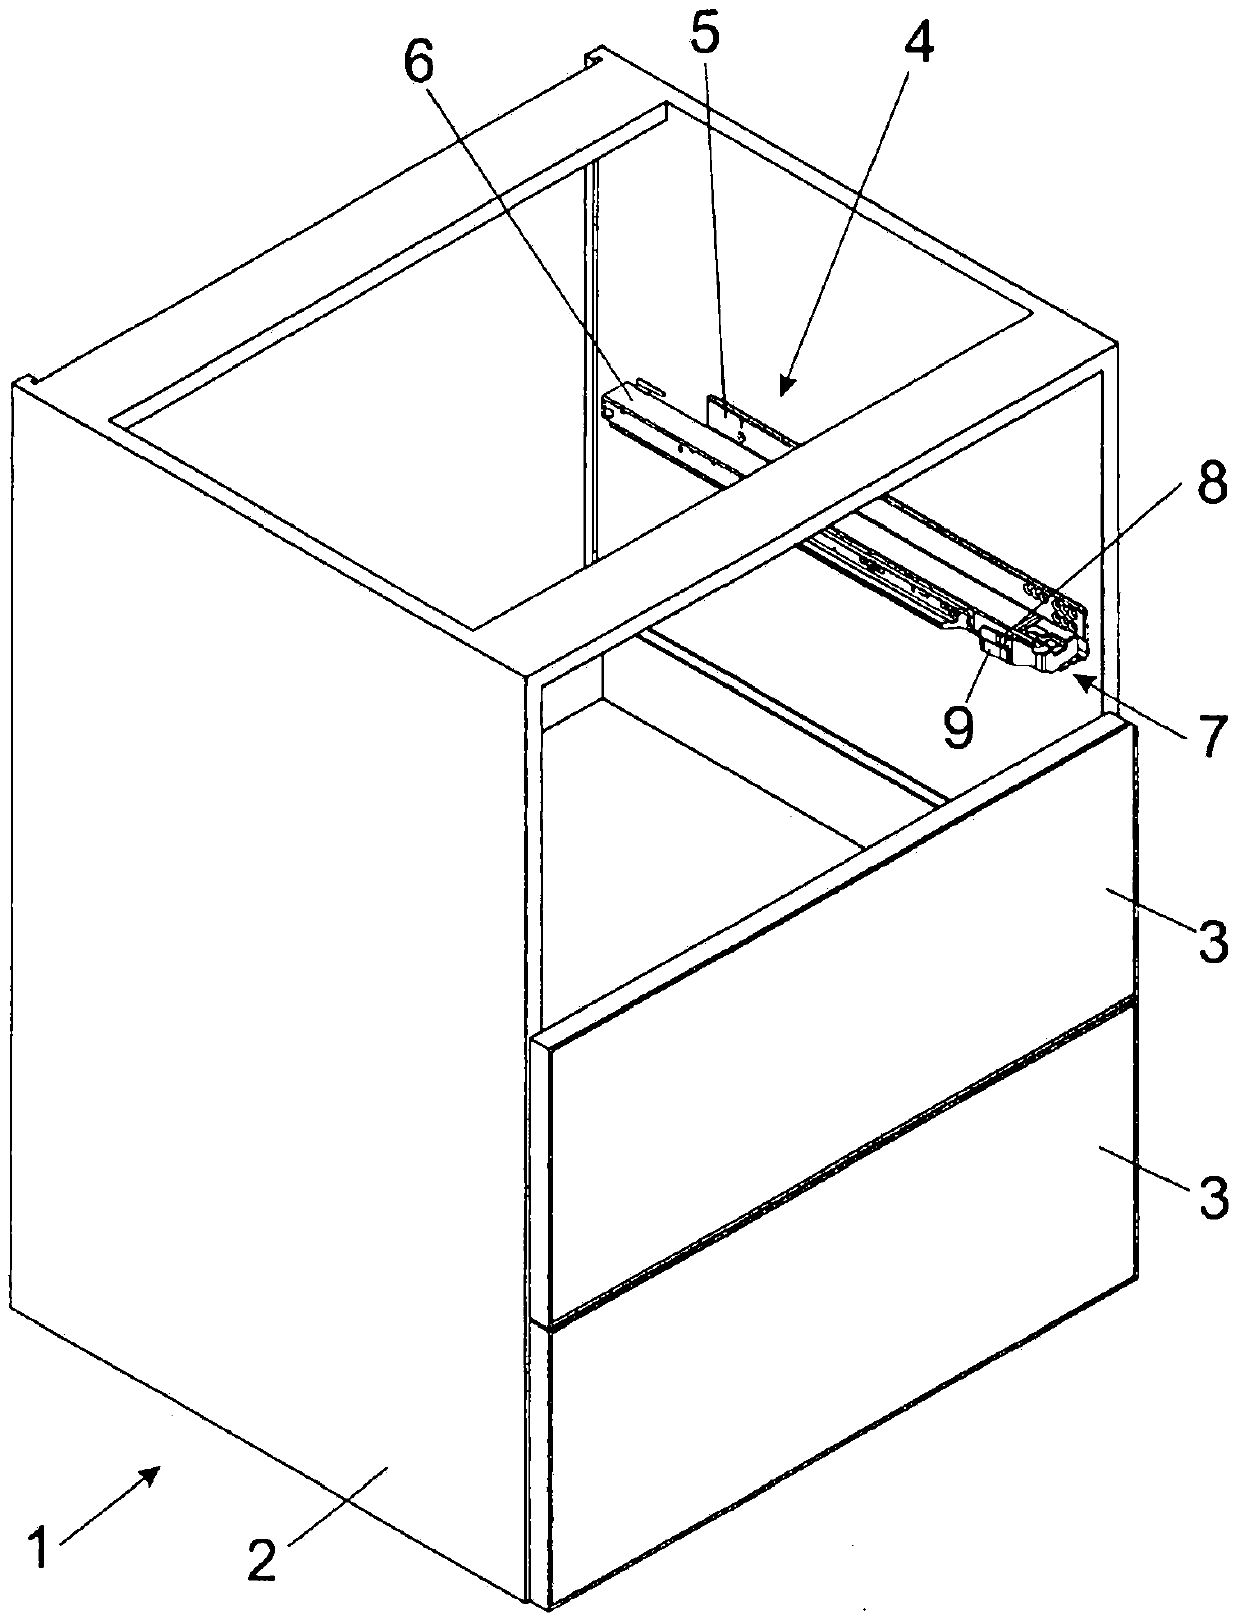 Drawer pull-out guide